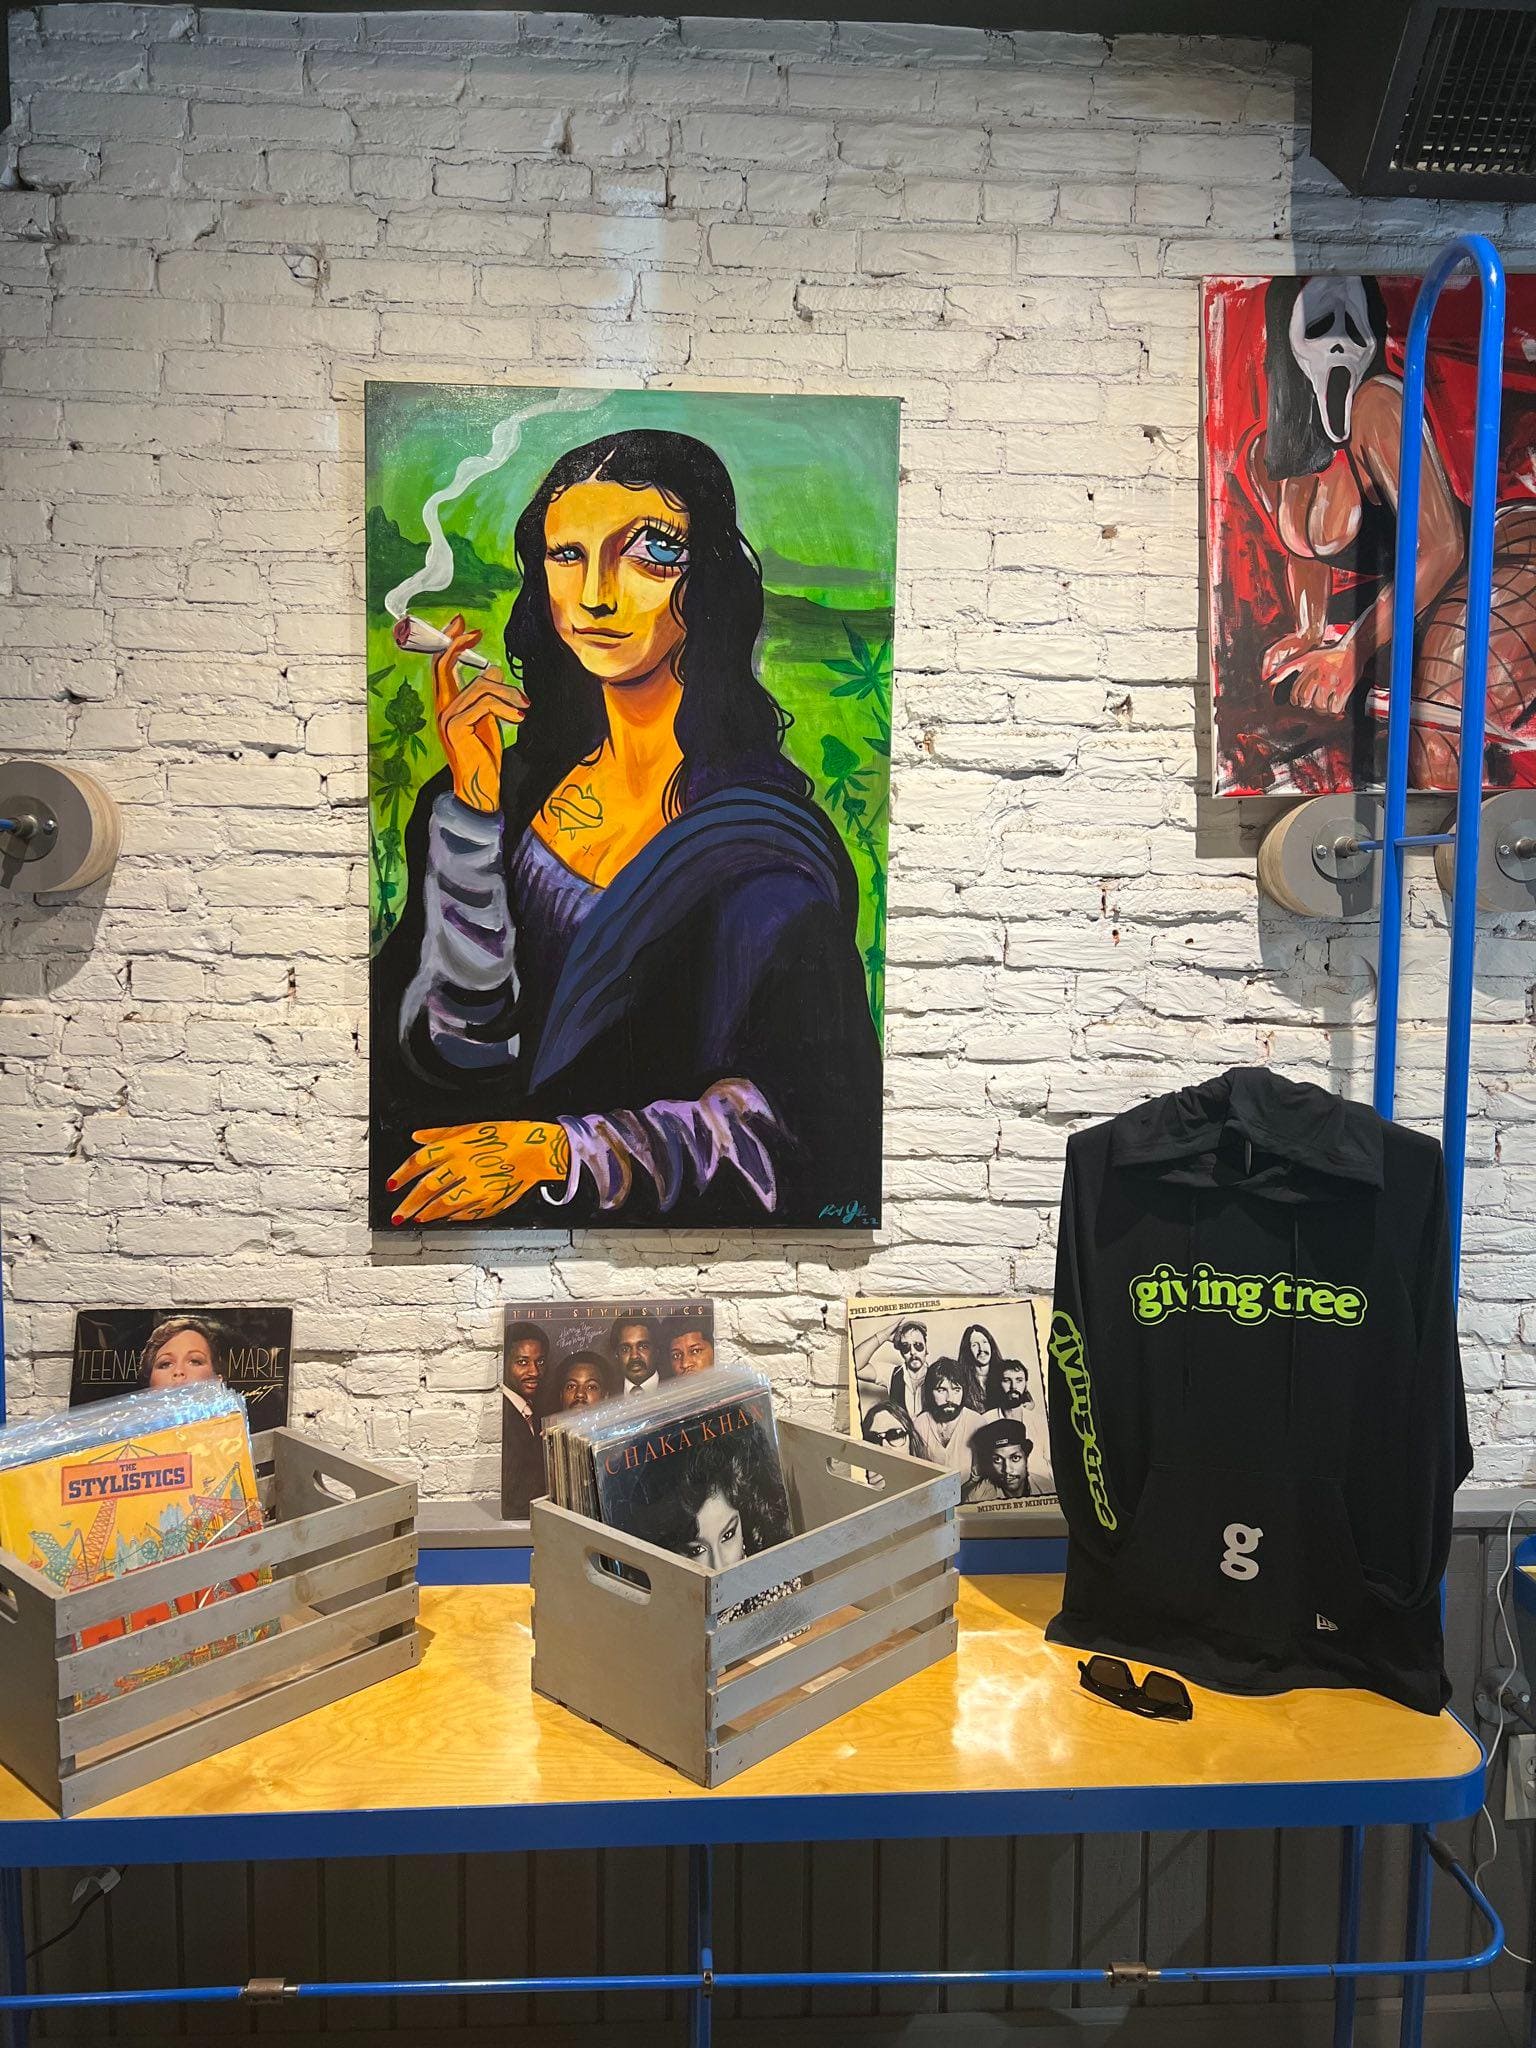 Giving-Tree-DC-art-gallery-and-weed-shop